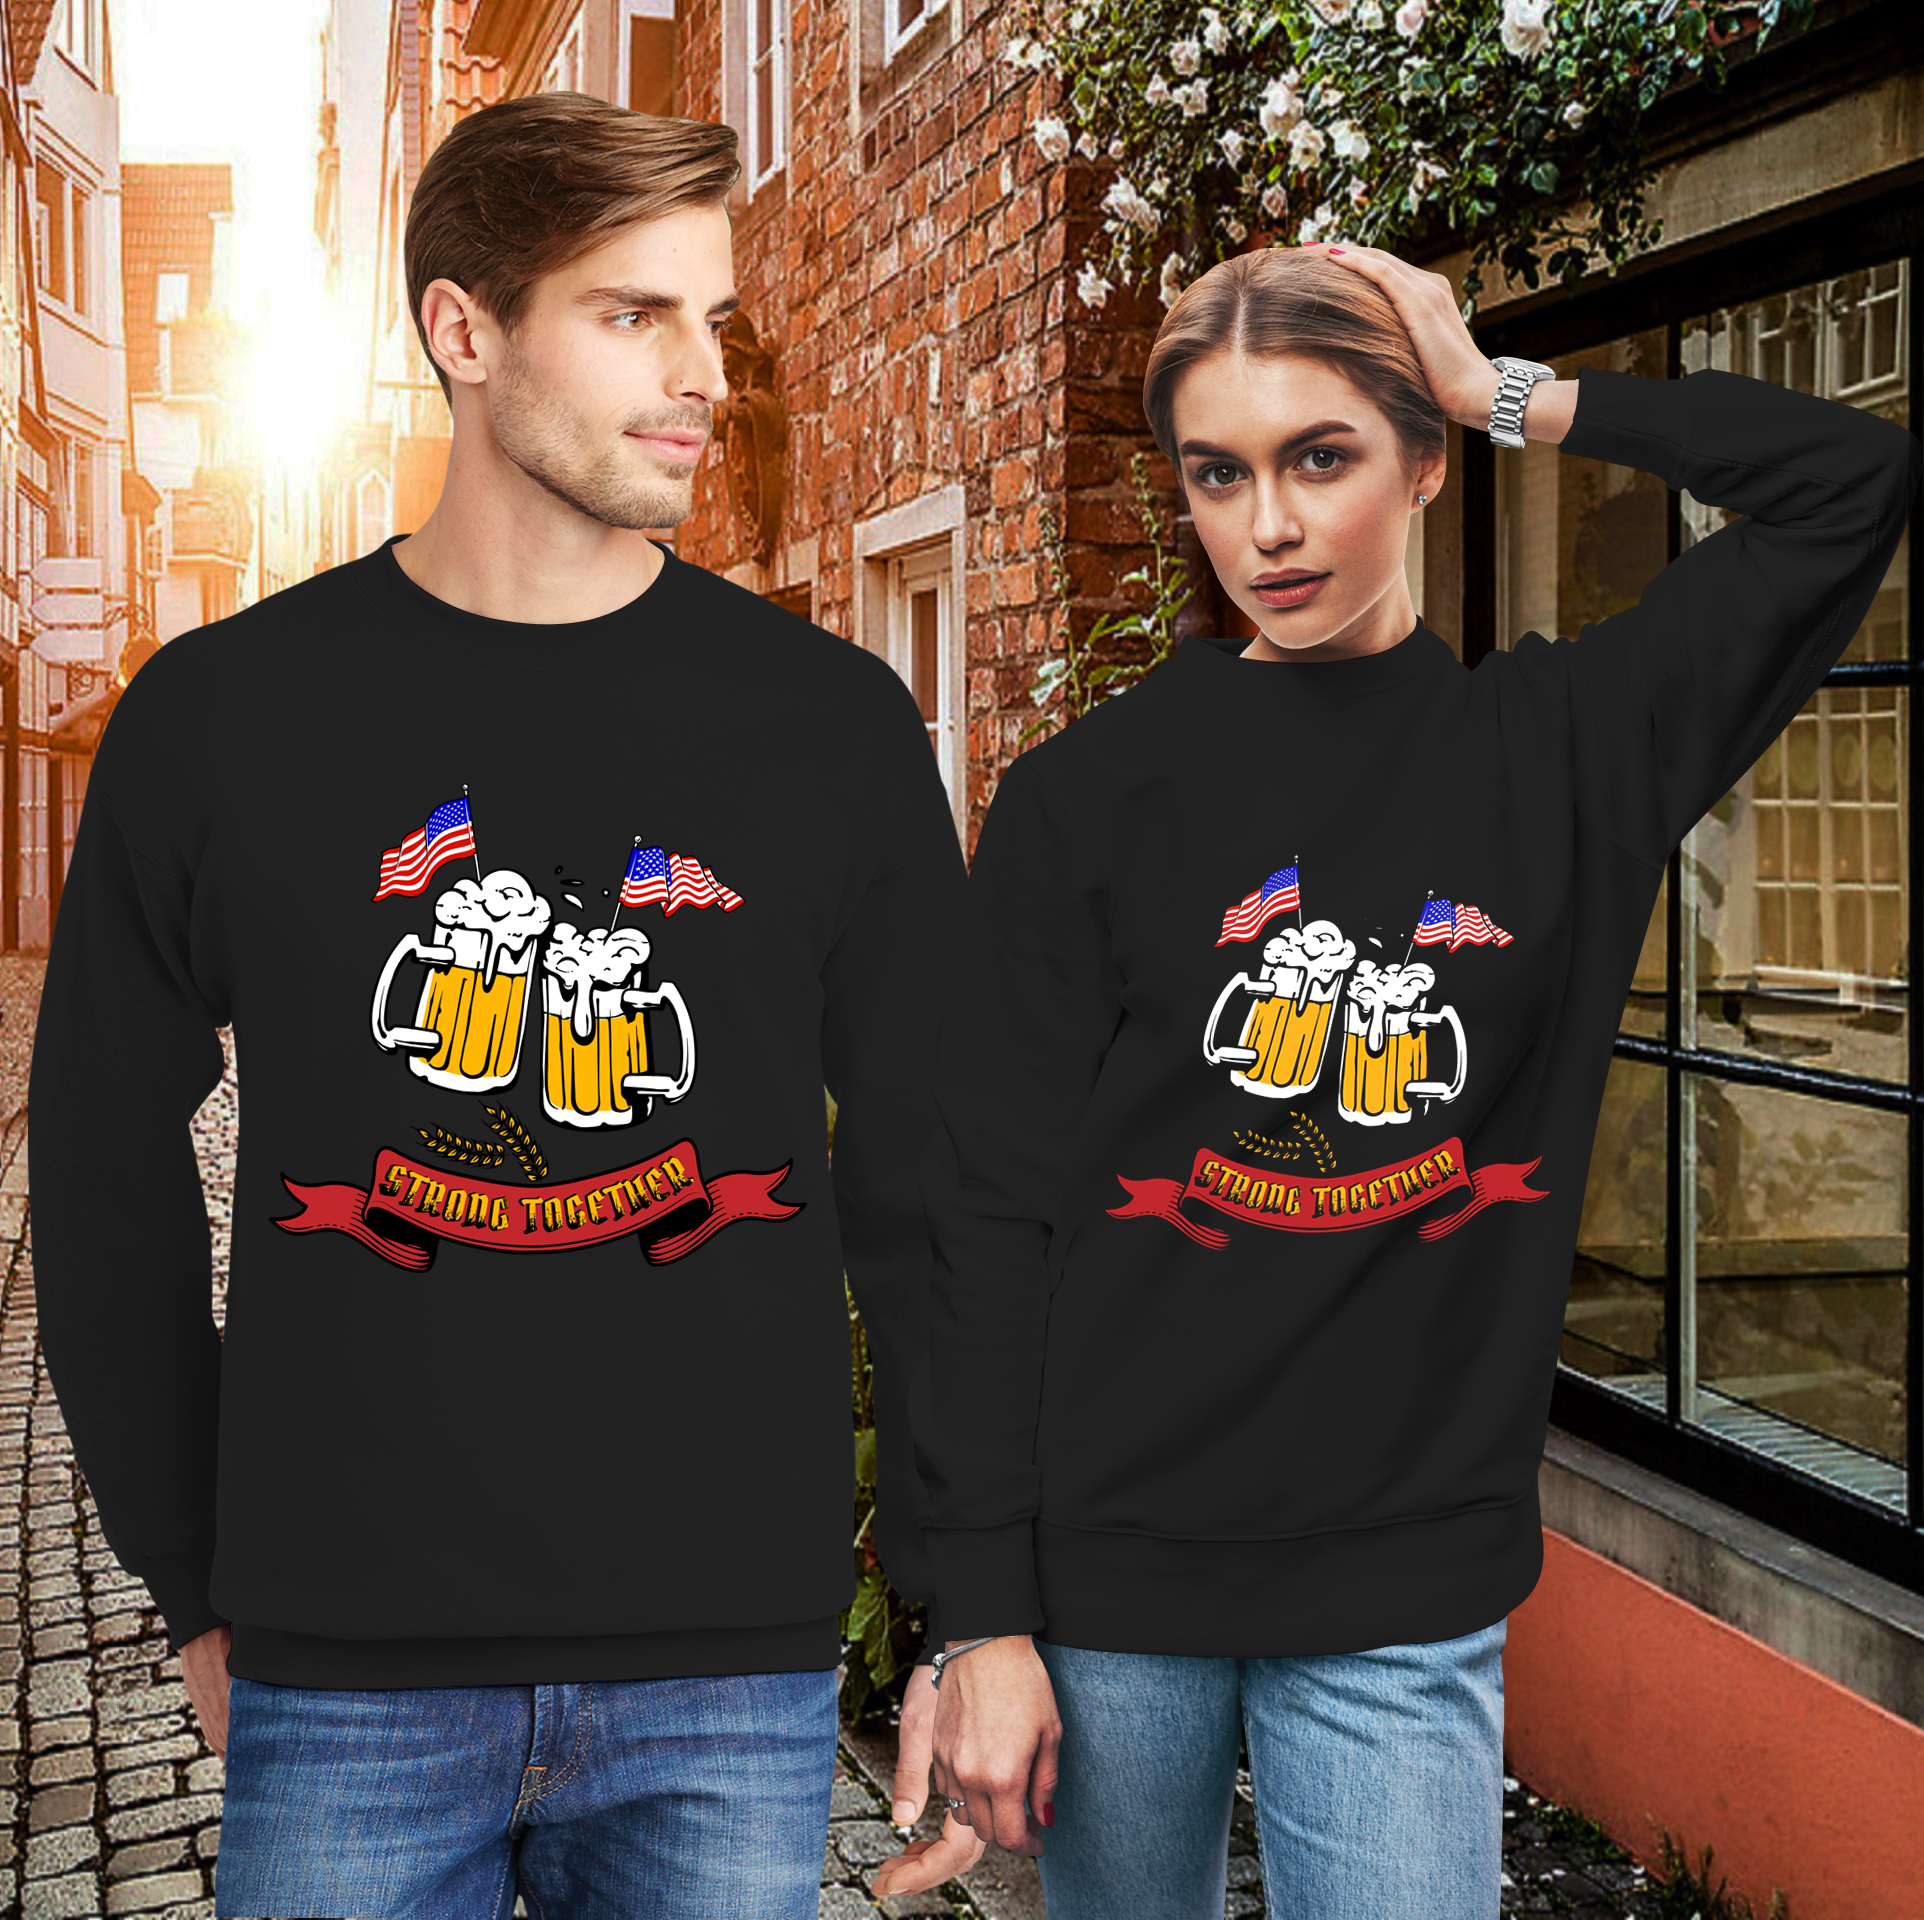 OFFICIAL Funny Beer America Strong Together Couple Lover Matching Sweatshirts